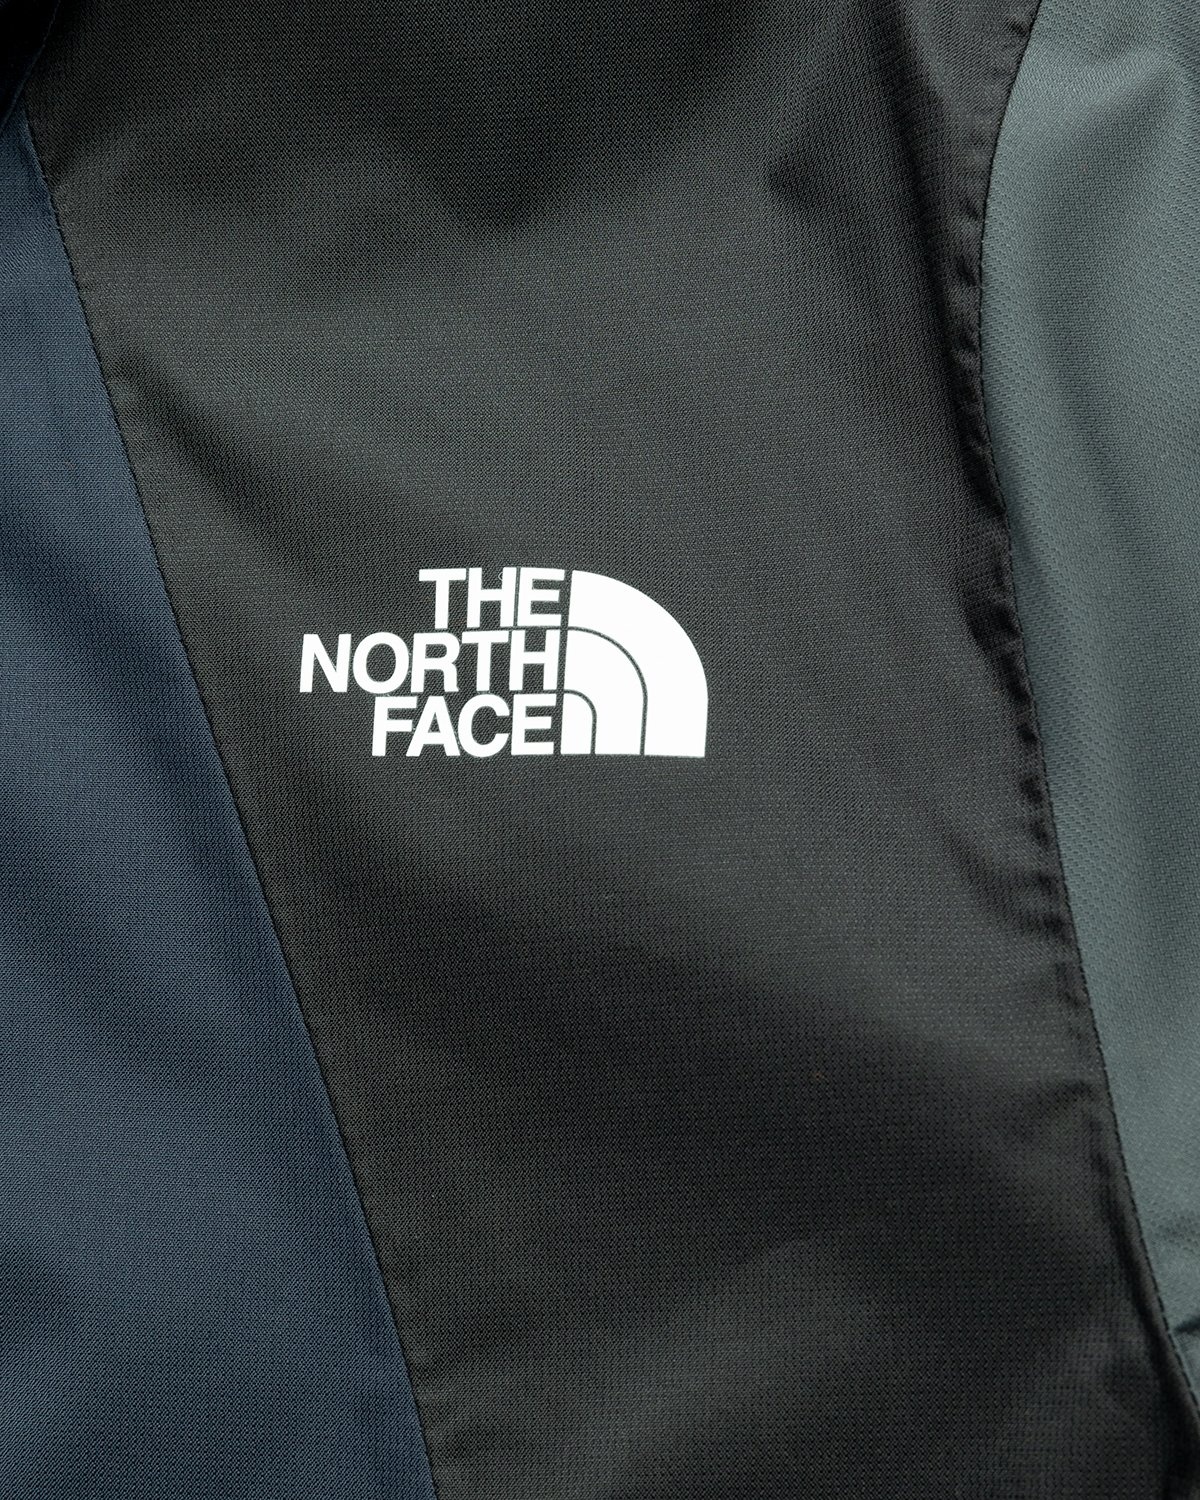 The North Face – Farside Jacket Aviator Navy - Outerwear - Blue - Image 5